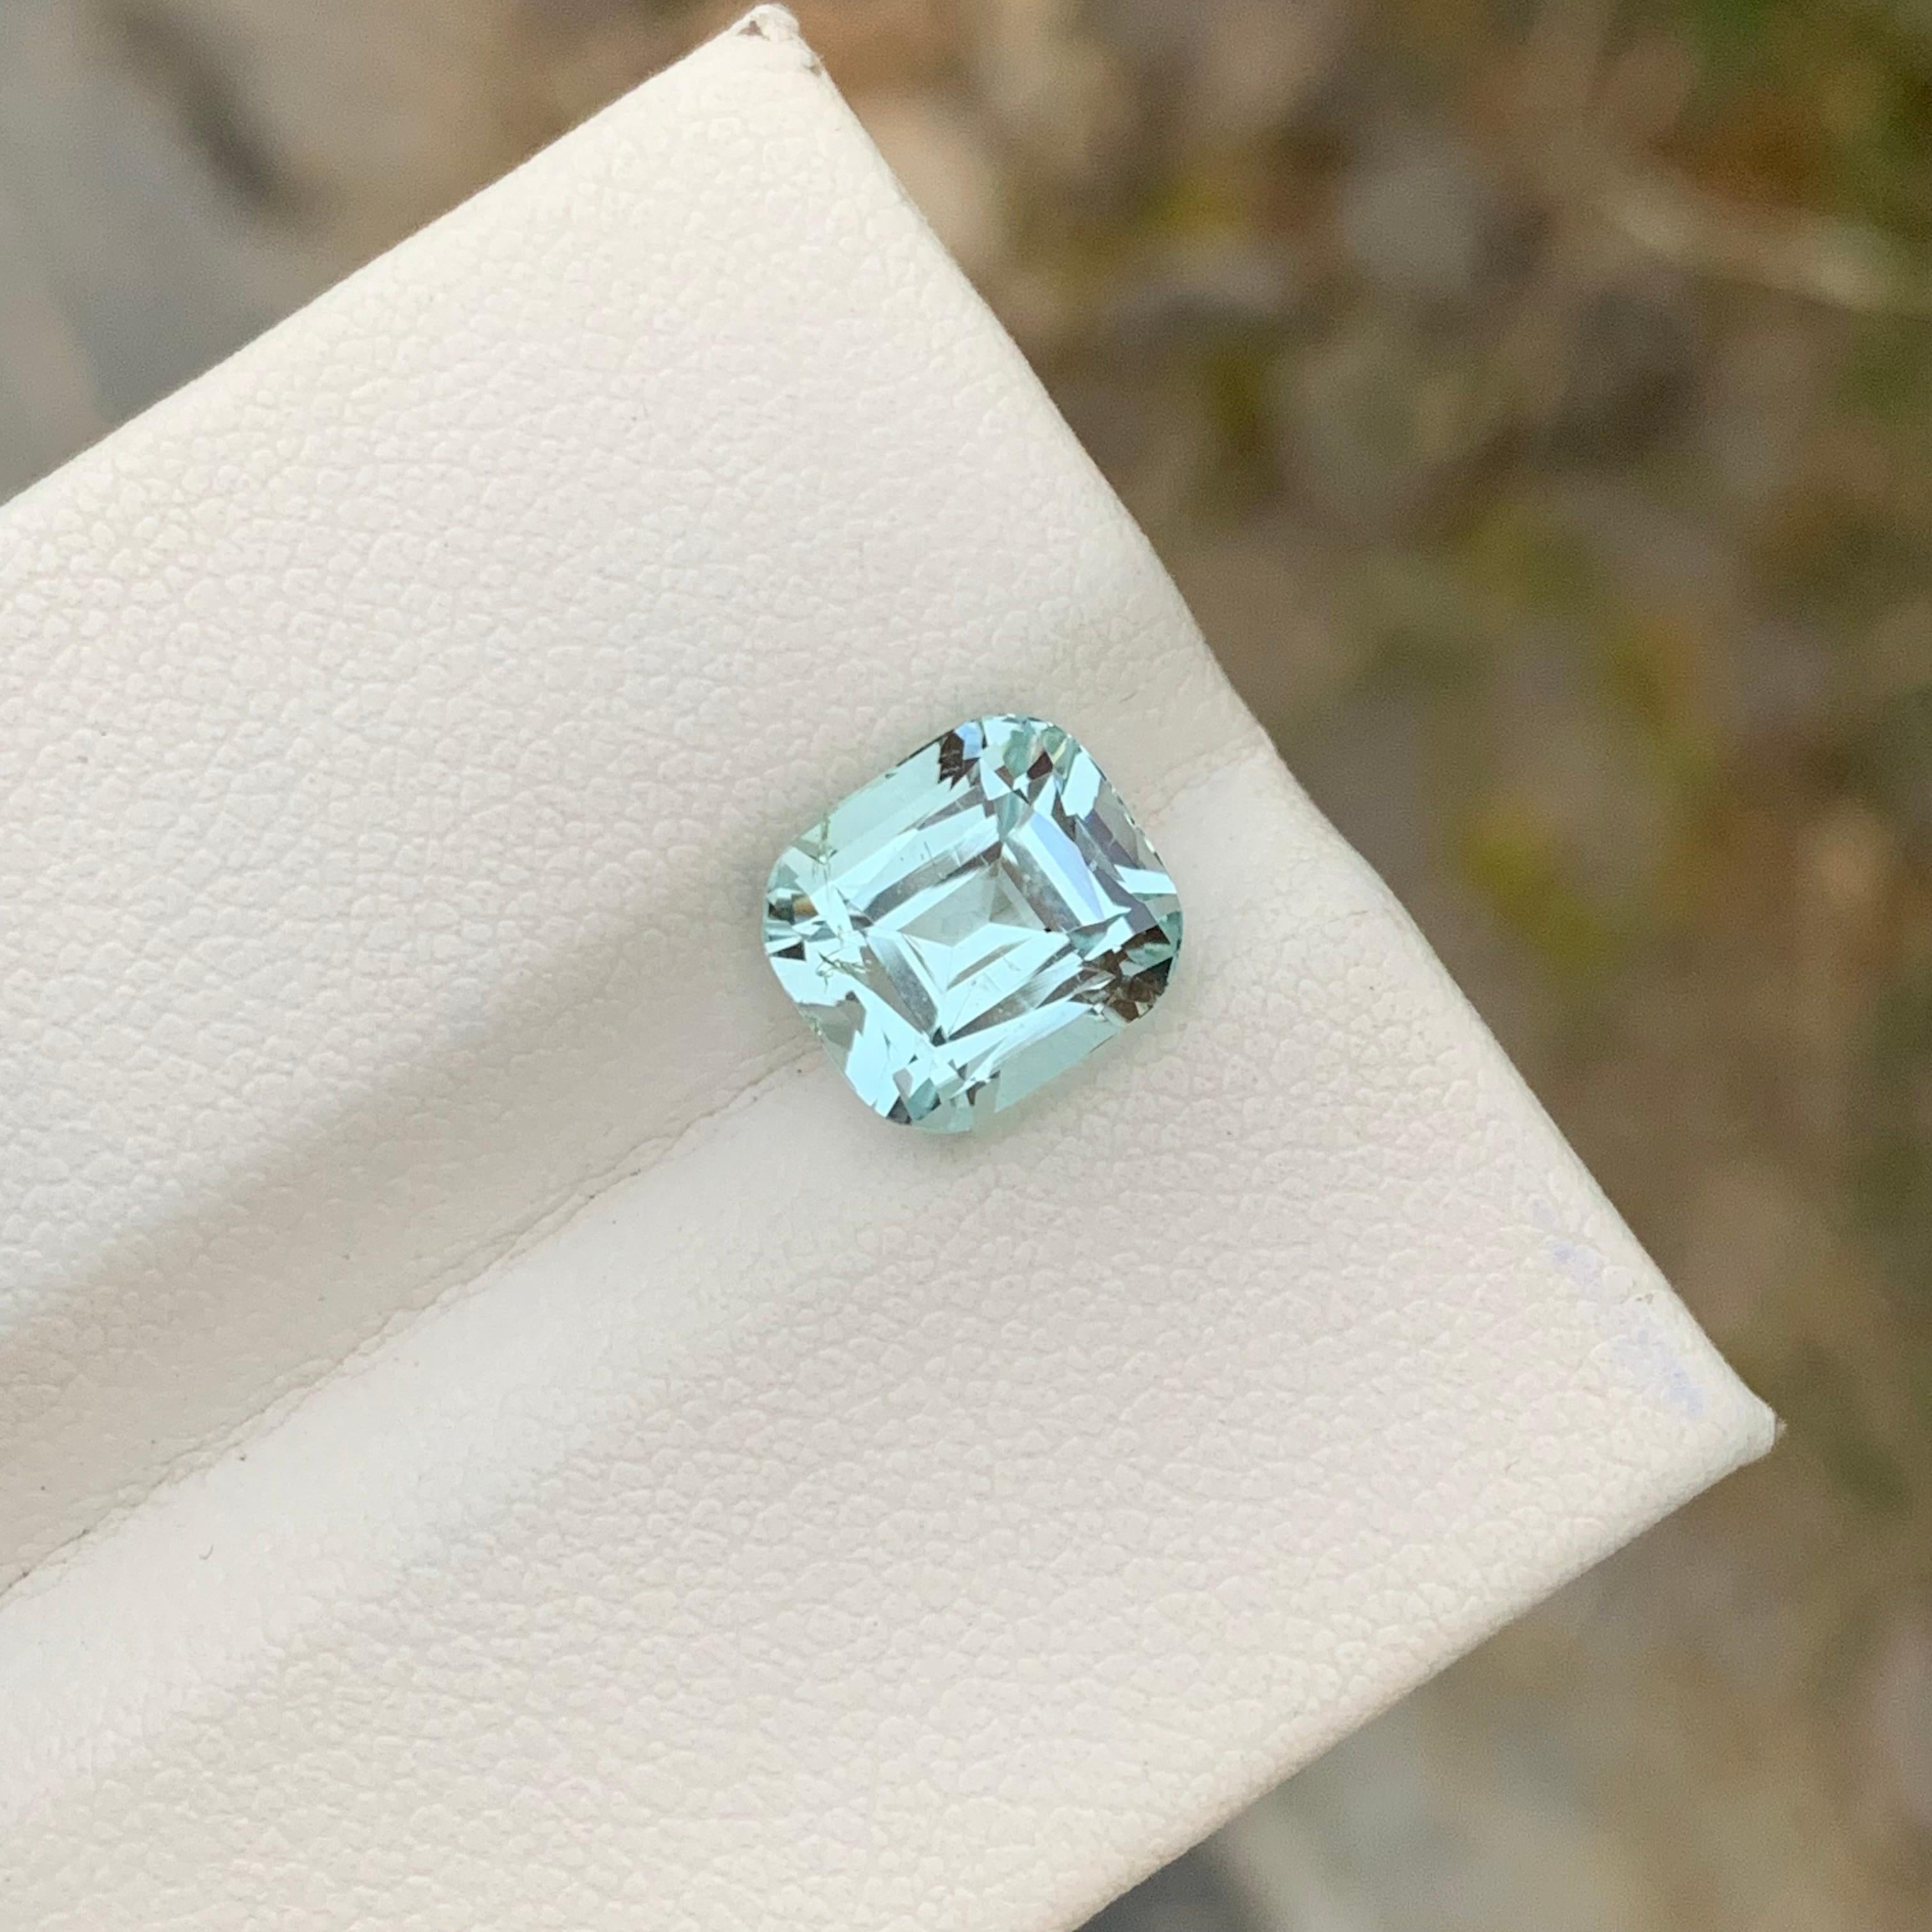 3.55 Carats Natural Loose Aquamarine Ring Gem From Shigar Valley Mine For Sale 8